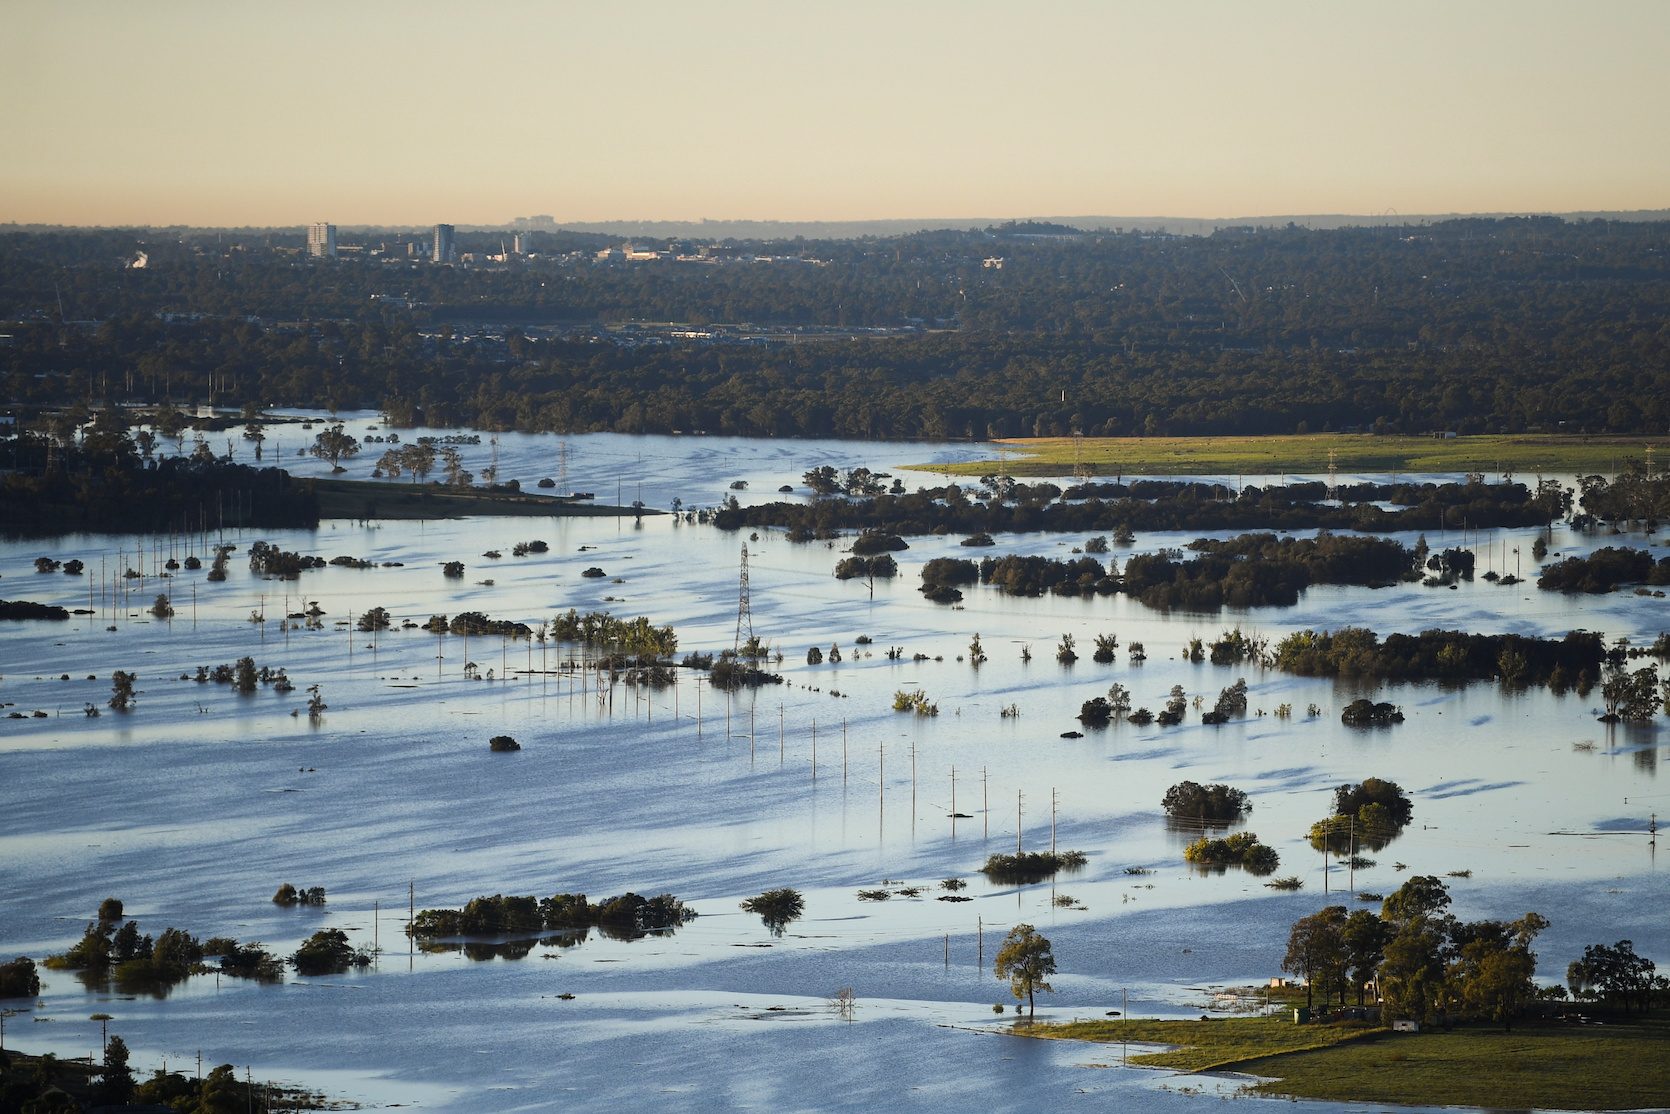 Australia floods claim first fatality; more evacuations as clean-up begins